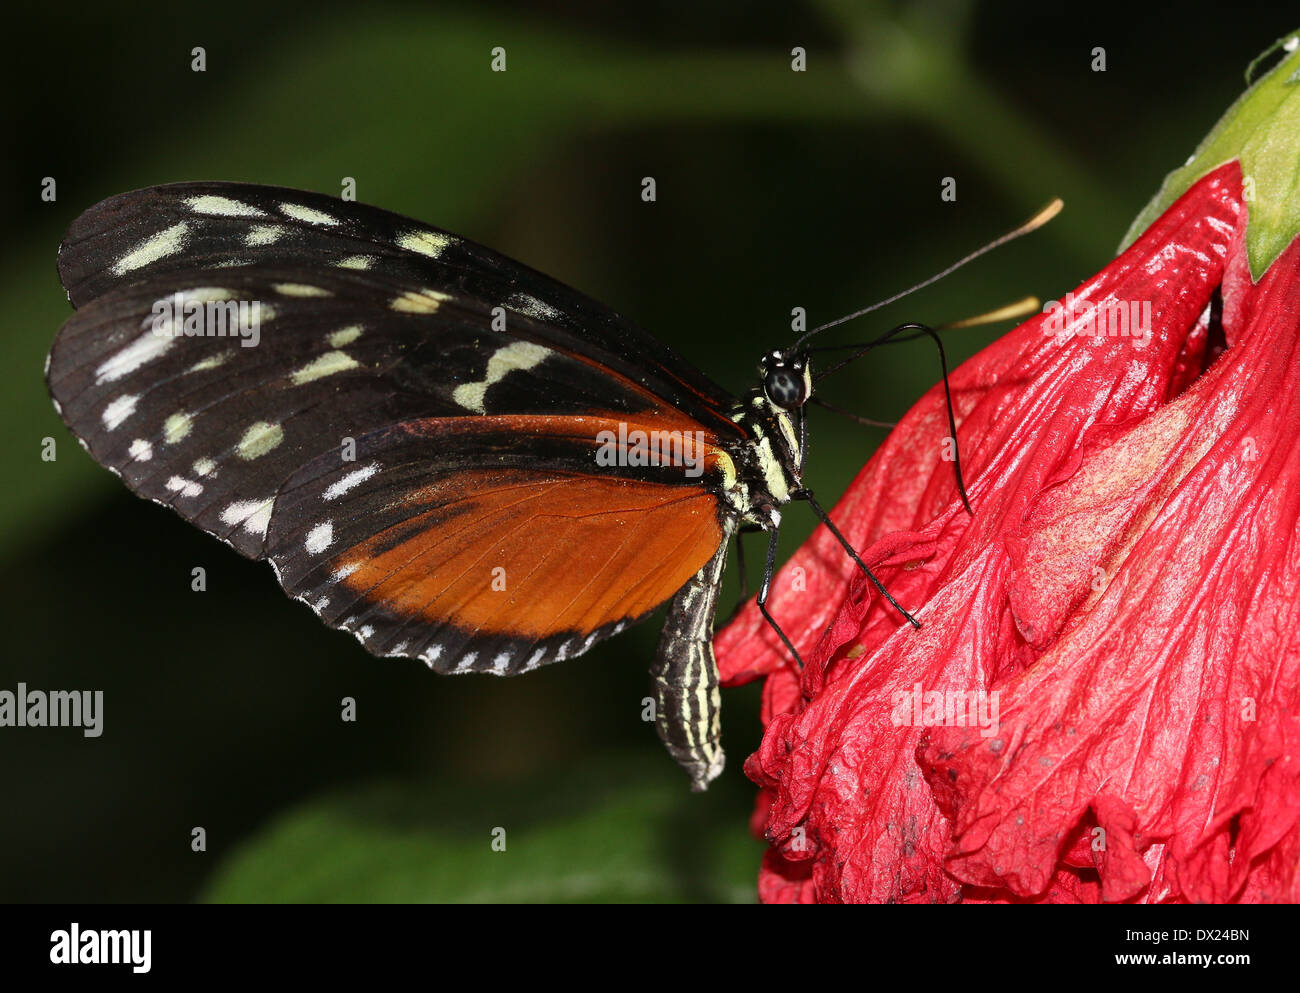 Tiger Longwing, Hecale Longwing or Golden Longwing butterfly (Heliconius hecale) foraging on a red tropical flower Stock Photo